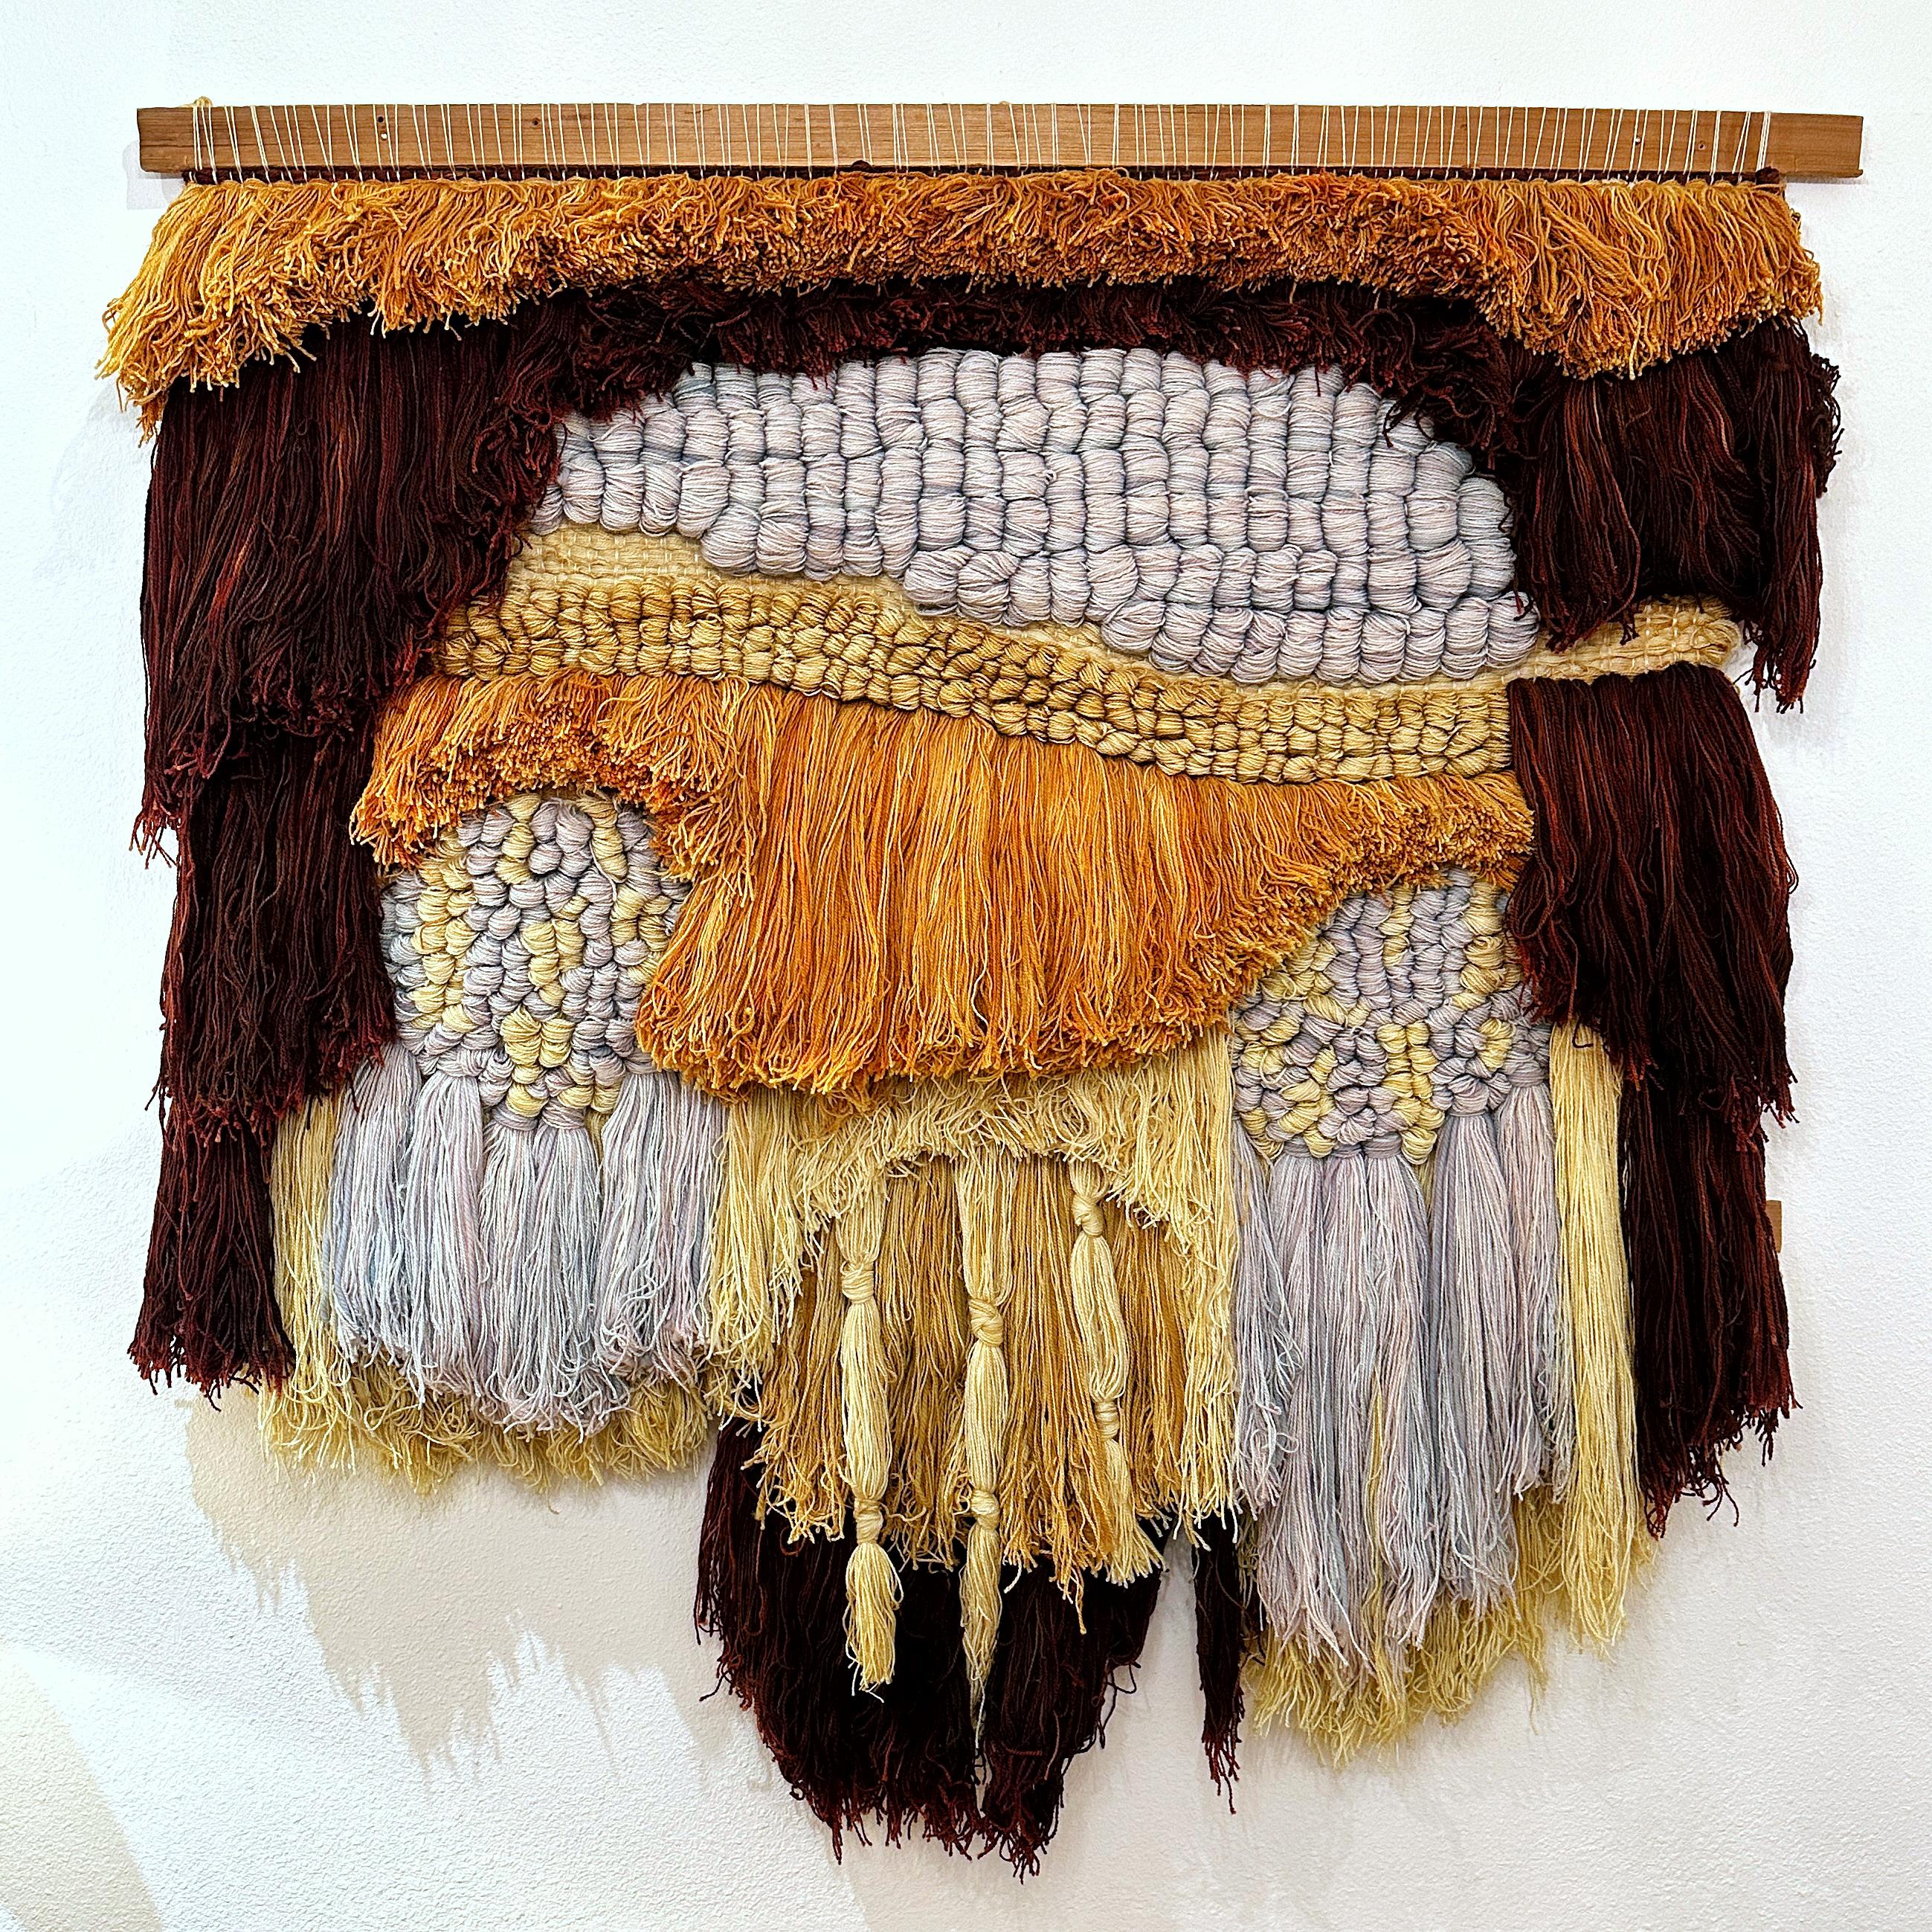 Fabulous Margo Farrin O’Connor for Ted Morris & Associates large fiber art wall hanging or tapestry, likely circa very late 1970s-1980s. This weaving features earthy tones of dark and medium brown, rust, orange, yellow, and light gray. These